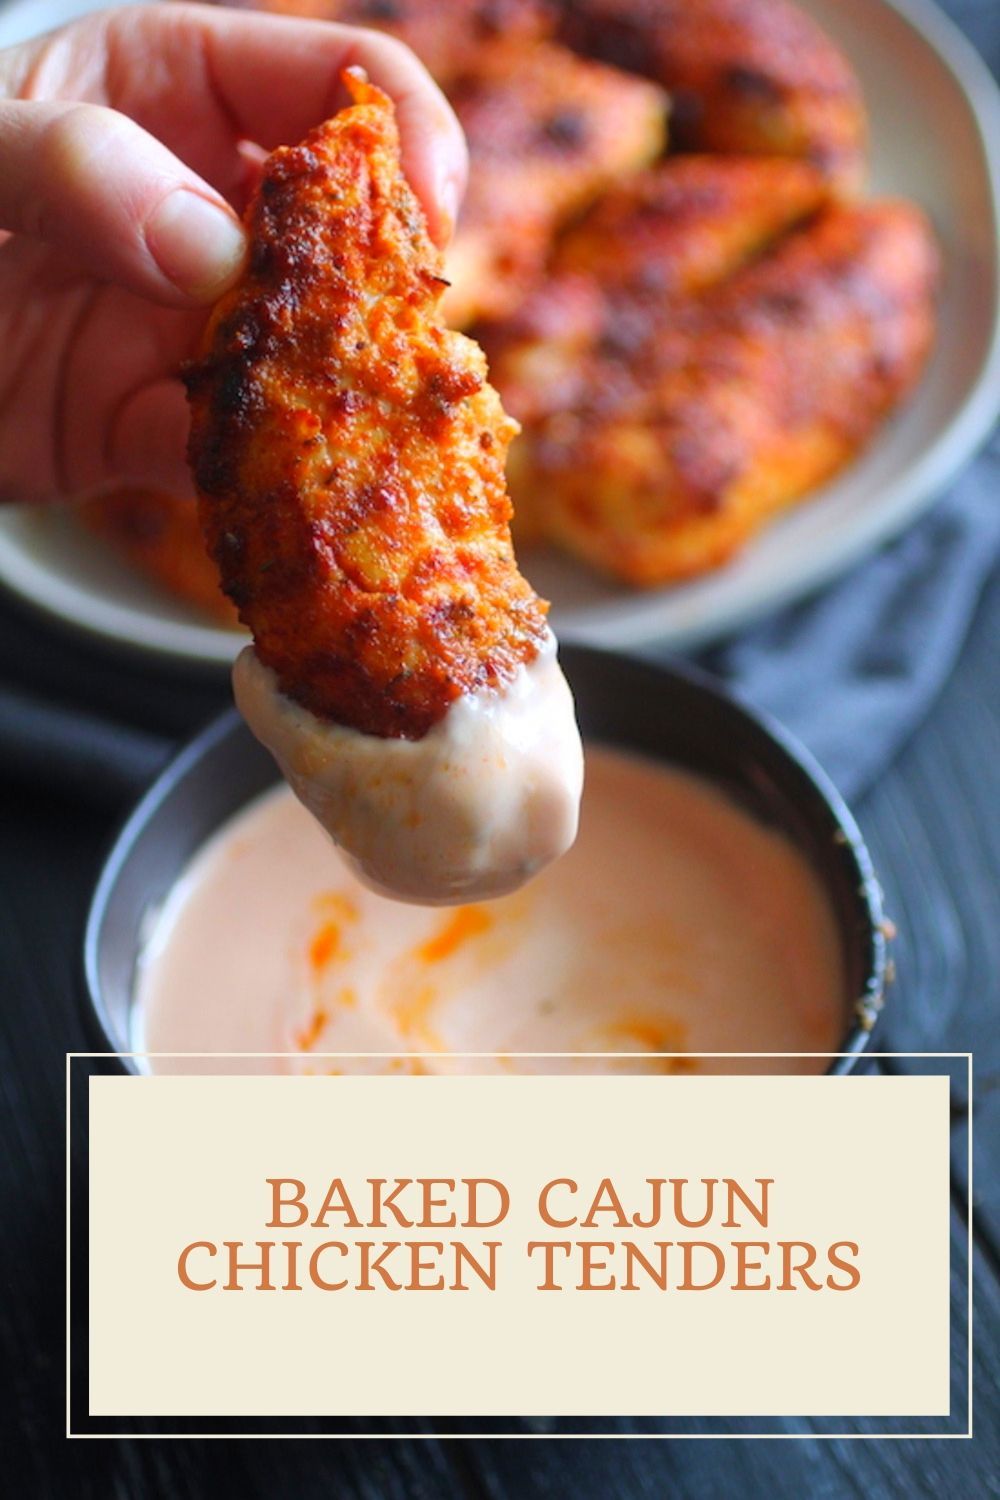 Baked Cajun Chicken Tenders | Recipes, Zoodle recipes, Chicken recipes